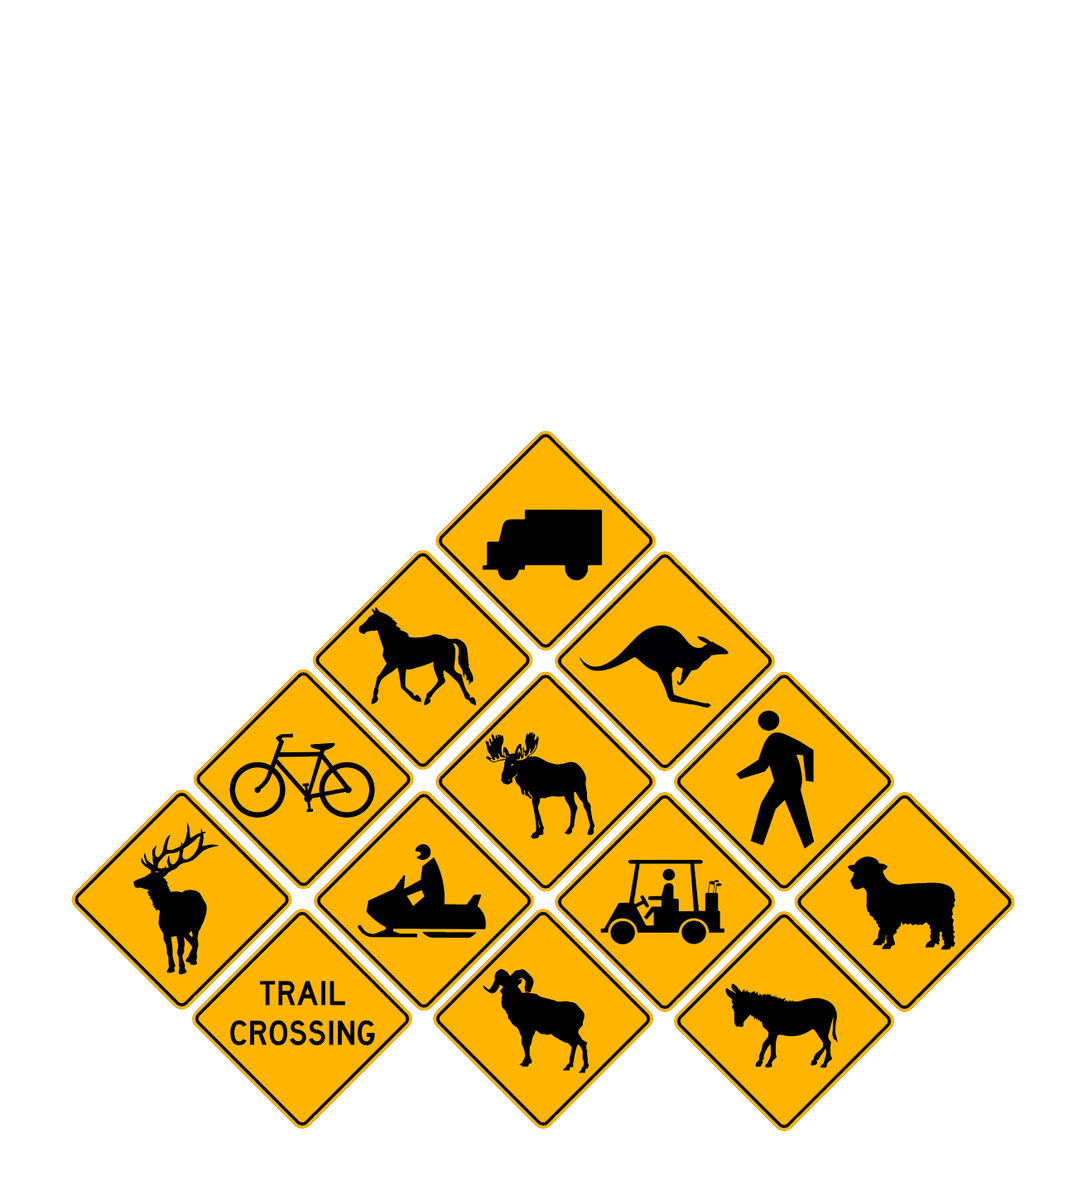 I've had time to make a bunch of warning signs, feel free to check them all out on our discord server: discord.gg/ZV6ZcbfUgQ